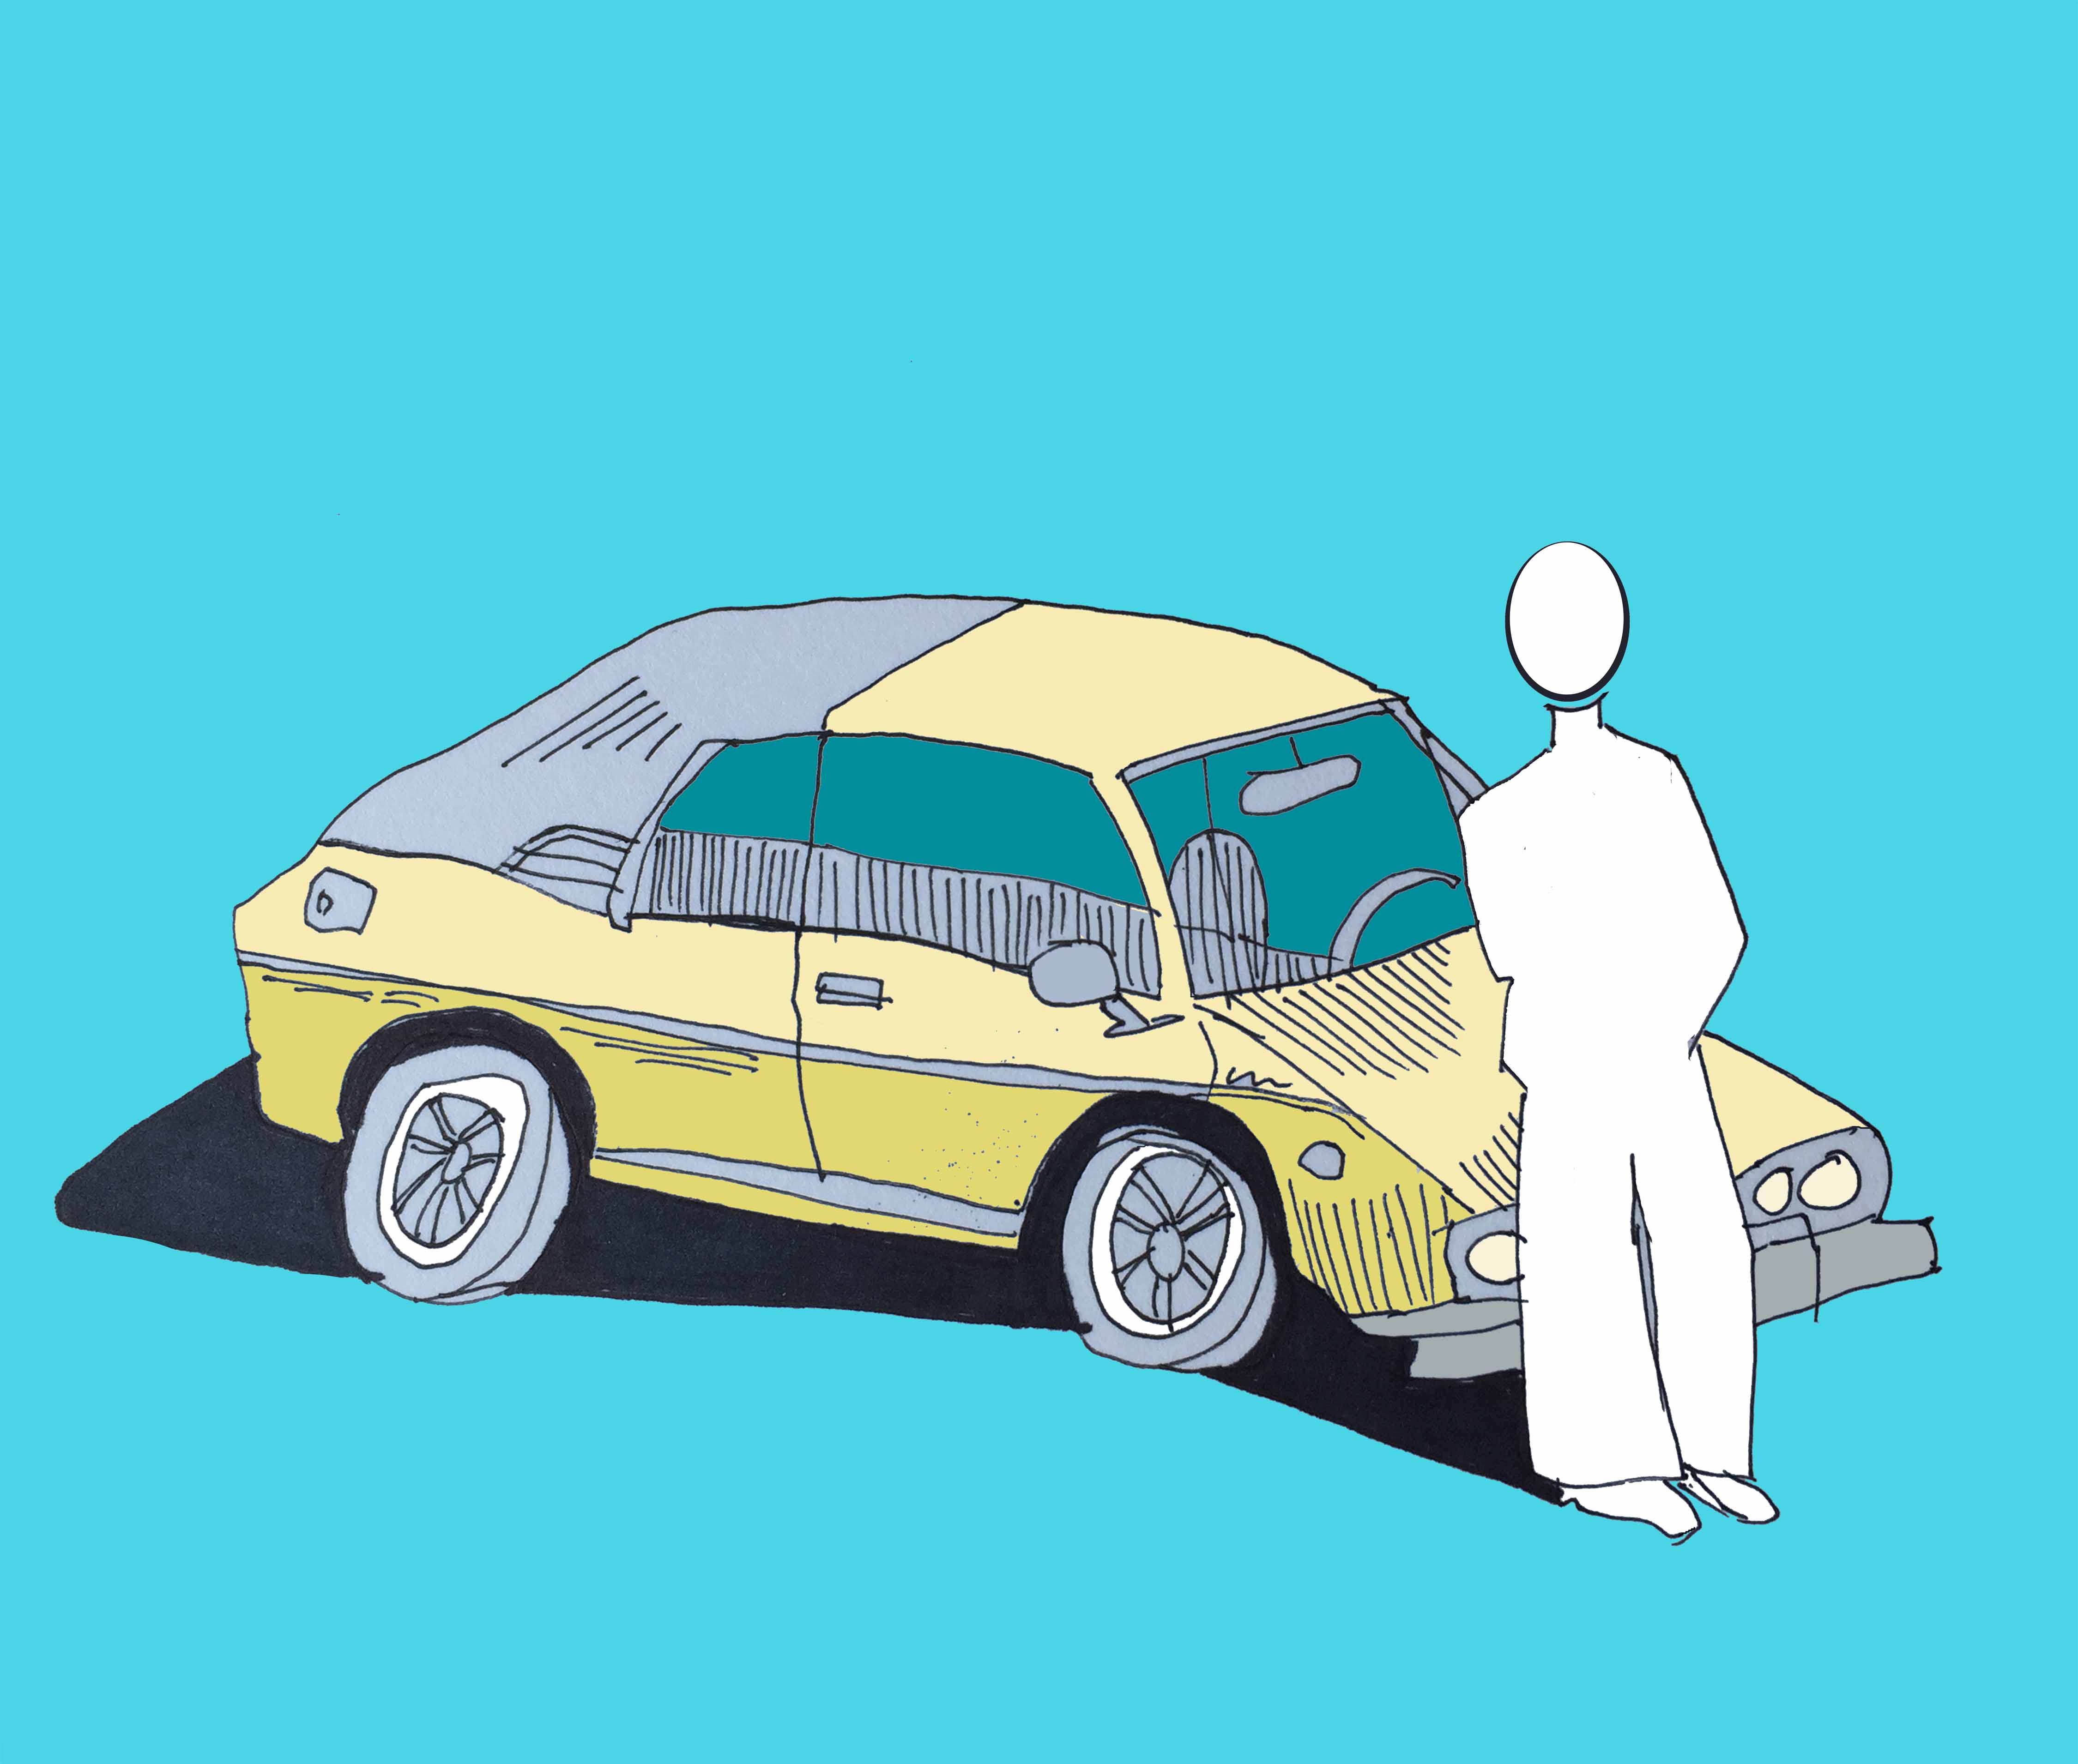 art every day number 107 / illustration / drawing / my new yellow car